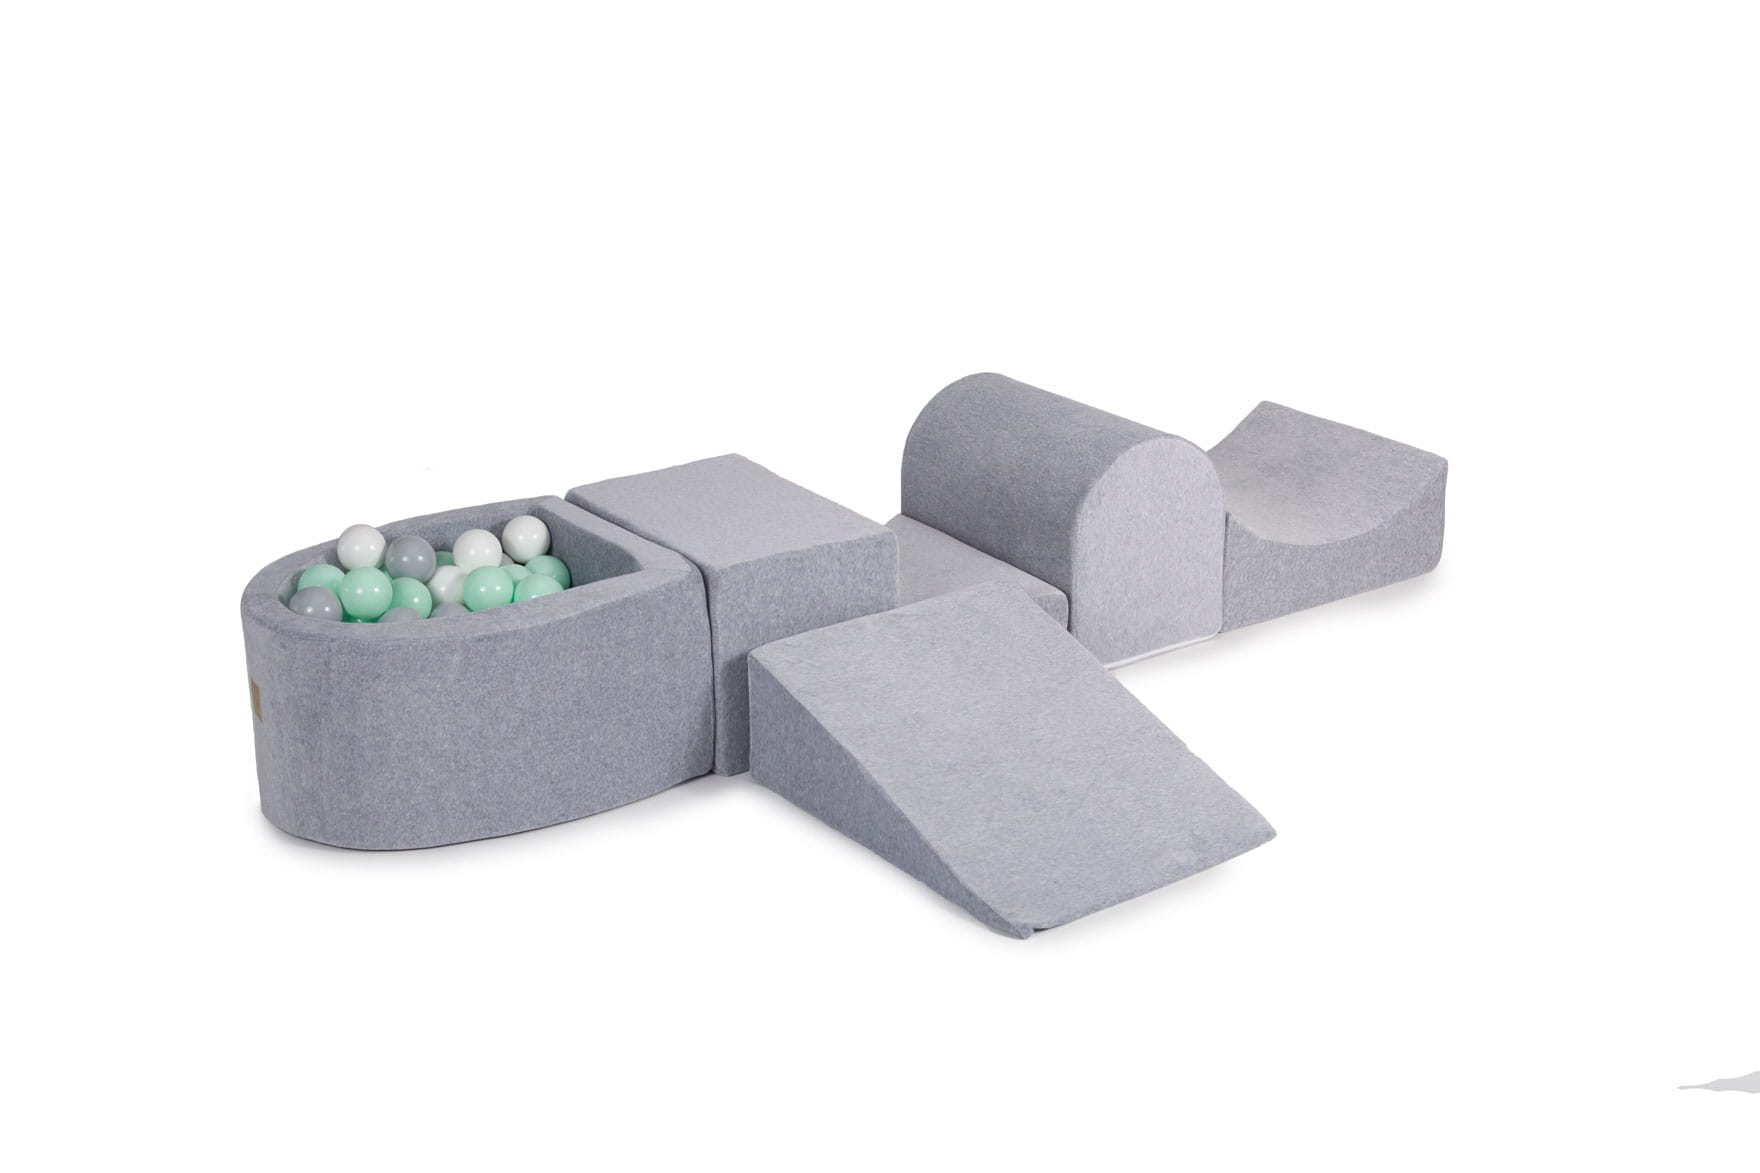 MEOW BABY Foam Playset with Small Ball Pit Playground for Children with 100 Balls Certified, Velvet, Light Gray: Mint/Gray/White